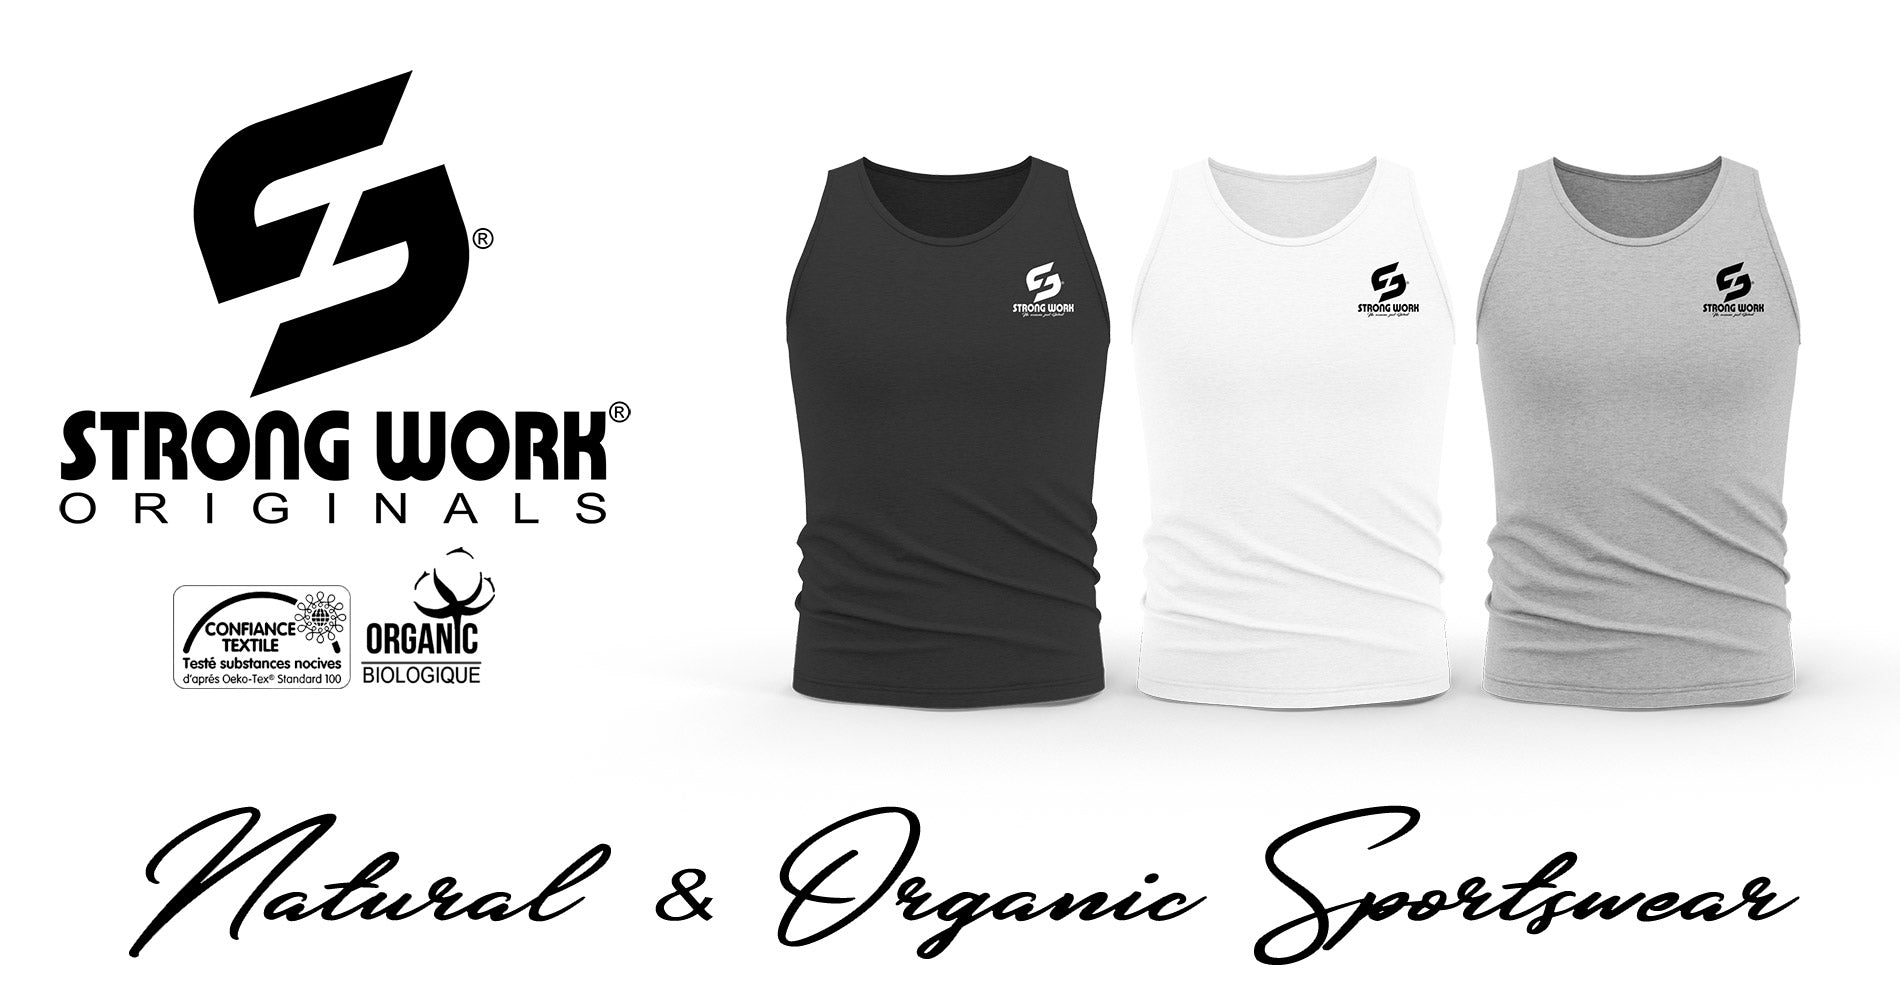 STRONG WORK CLASSIC ORGANIC COTTON TANK TOP FOR MEN